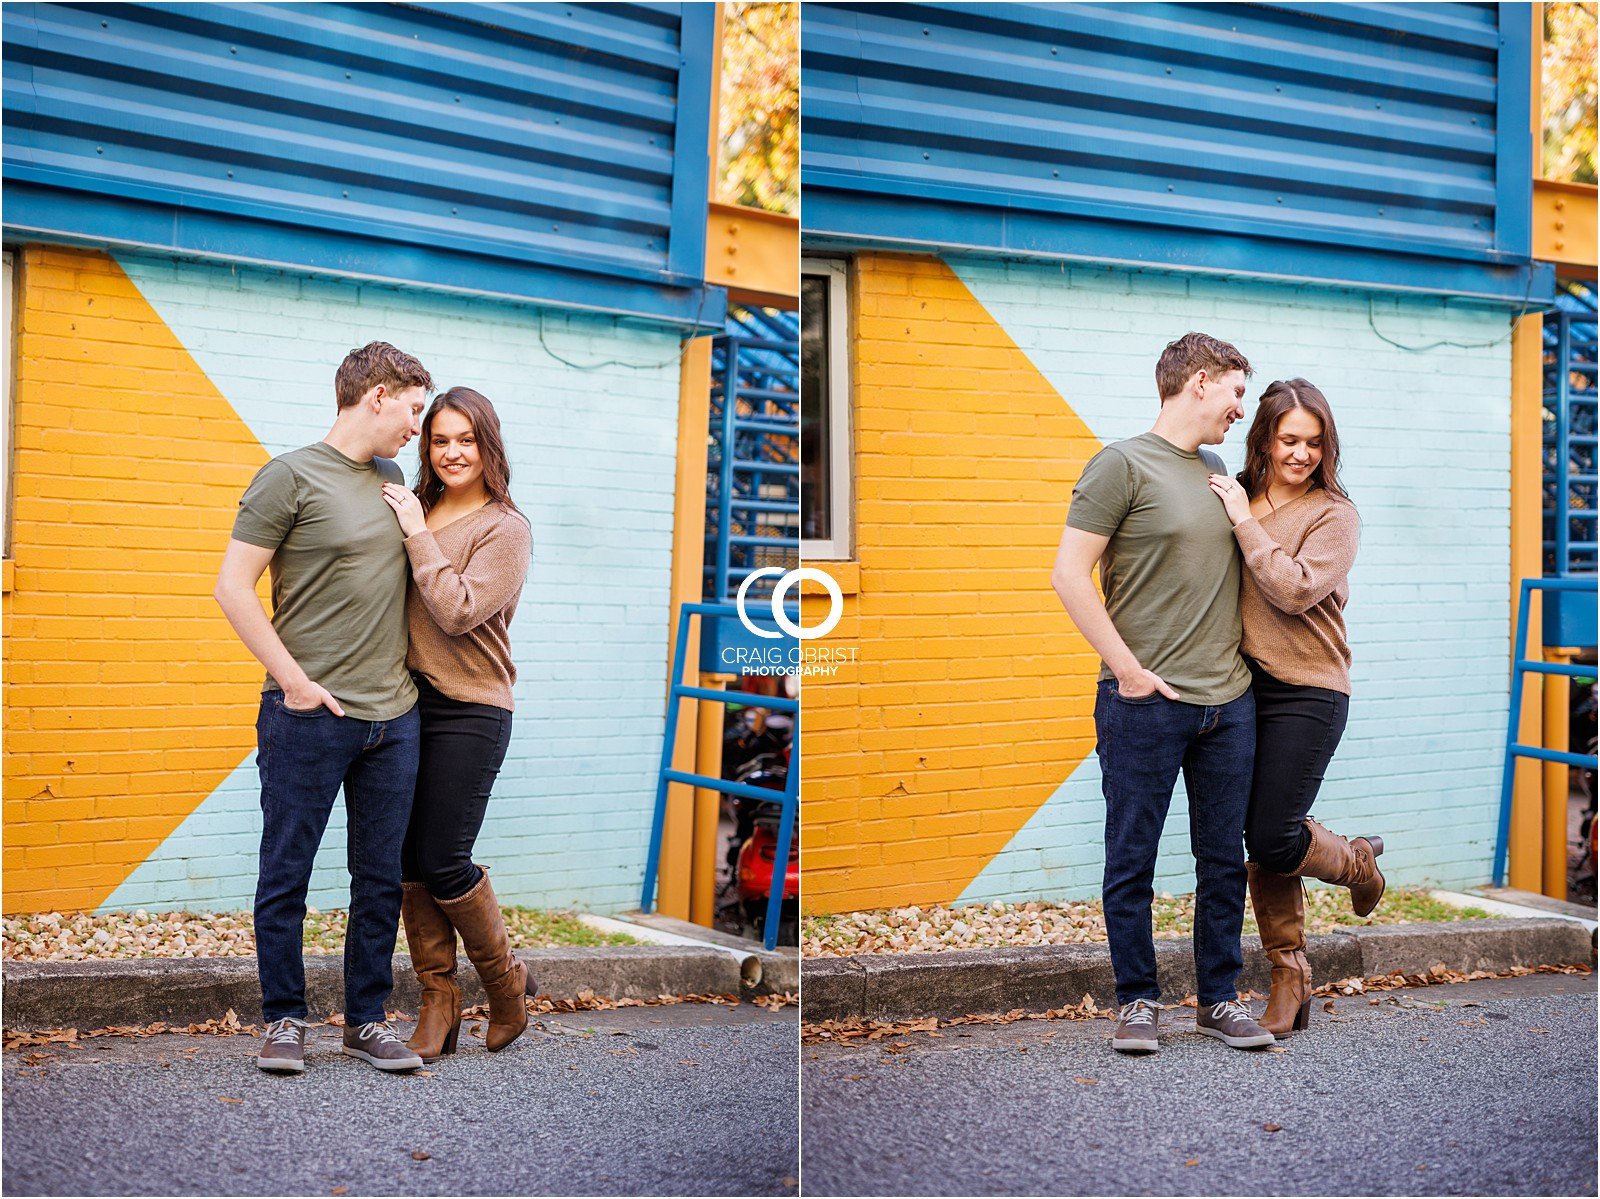 Downtown Decateur Stone Mountain Cereal Ice Cream Engagement Portraits_0011.jpg